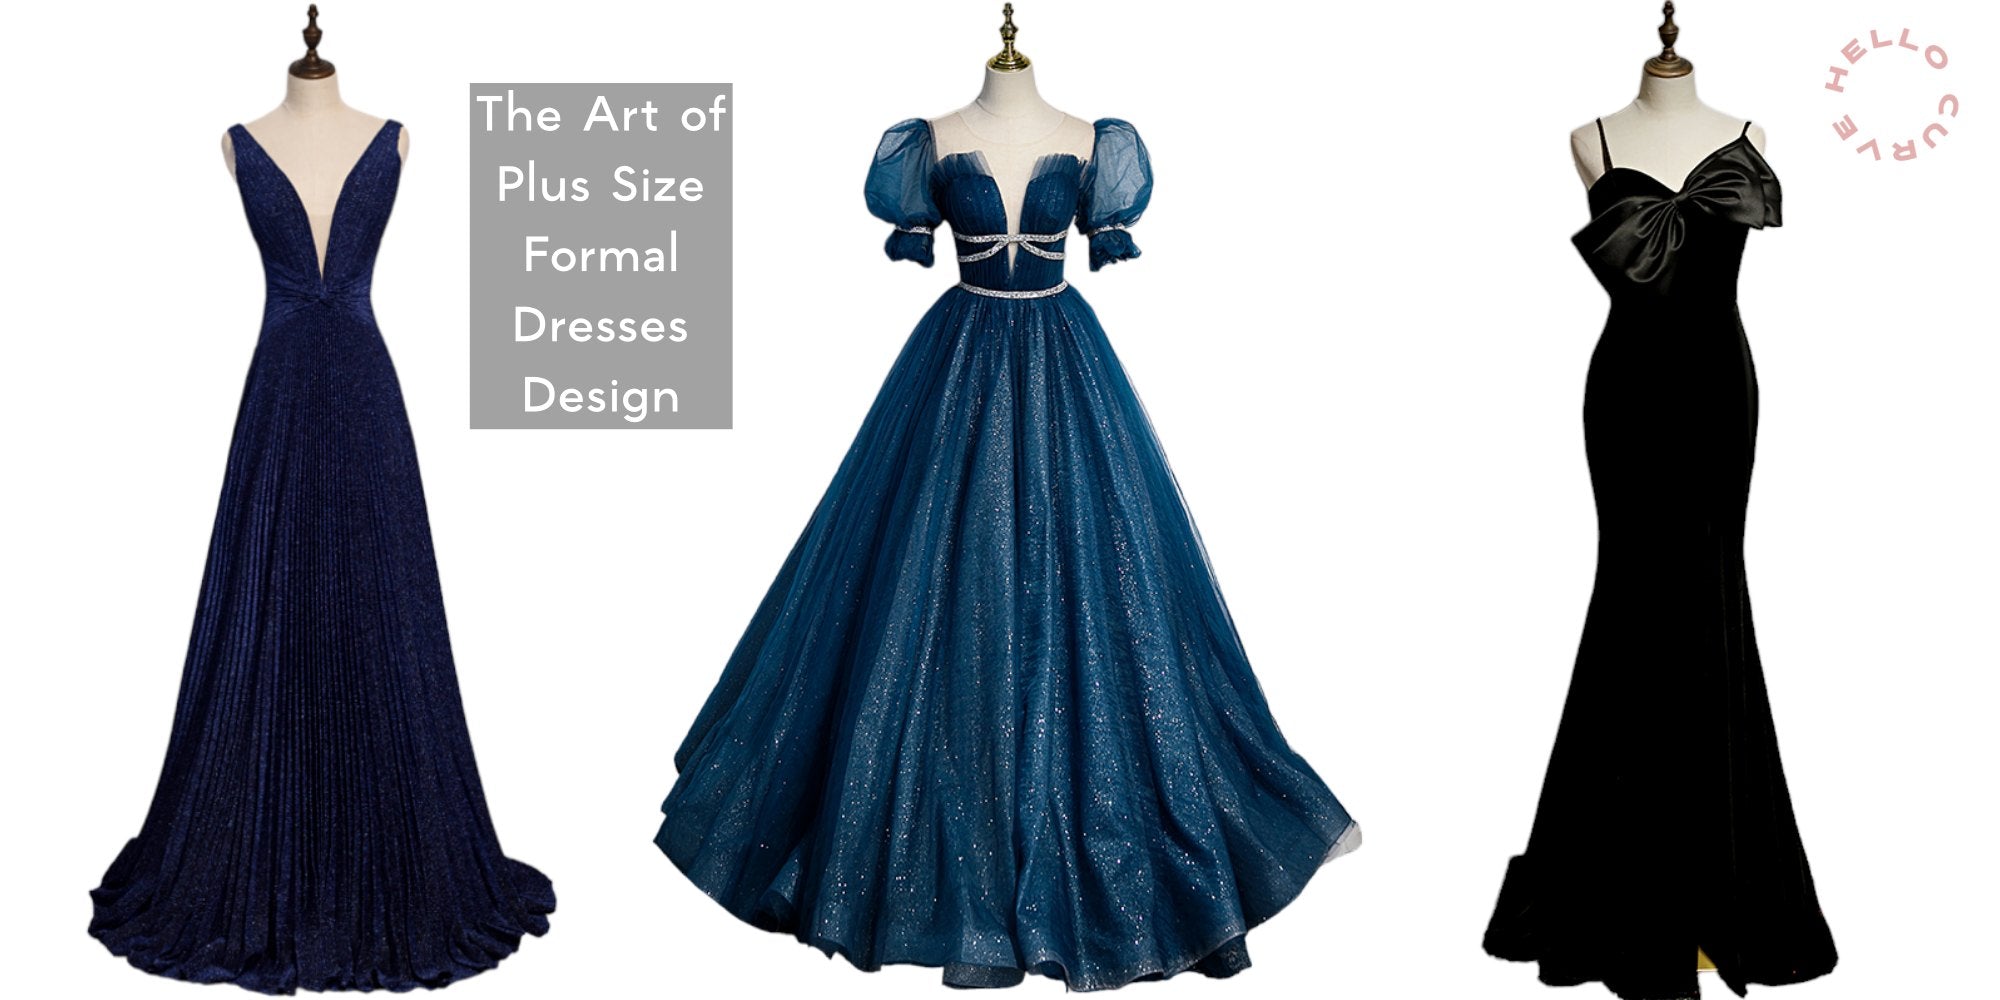 Behind the Seams: The Art of Plus Size Formal Dress Design